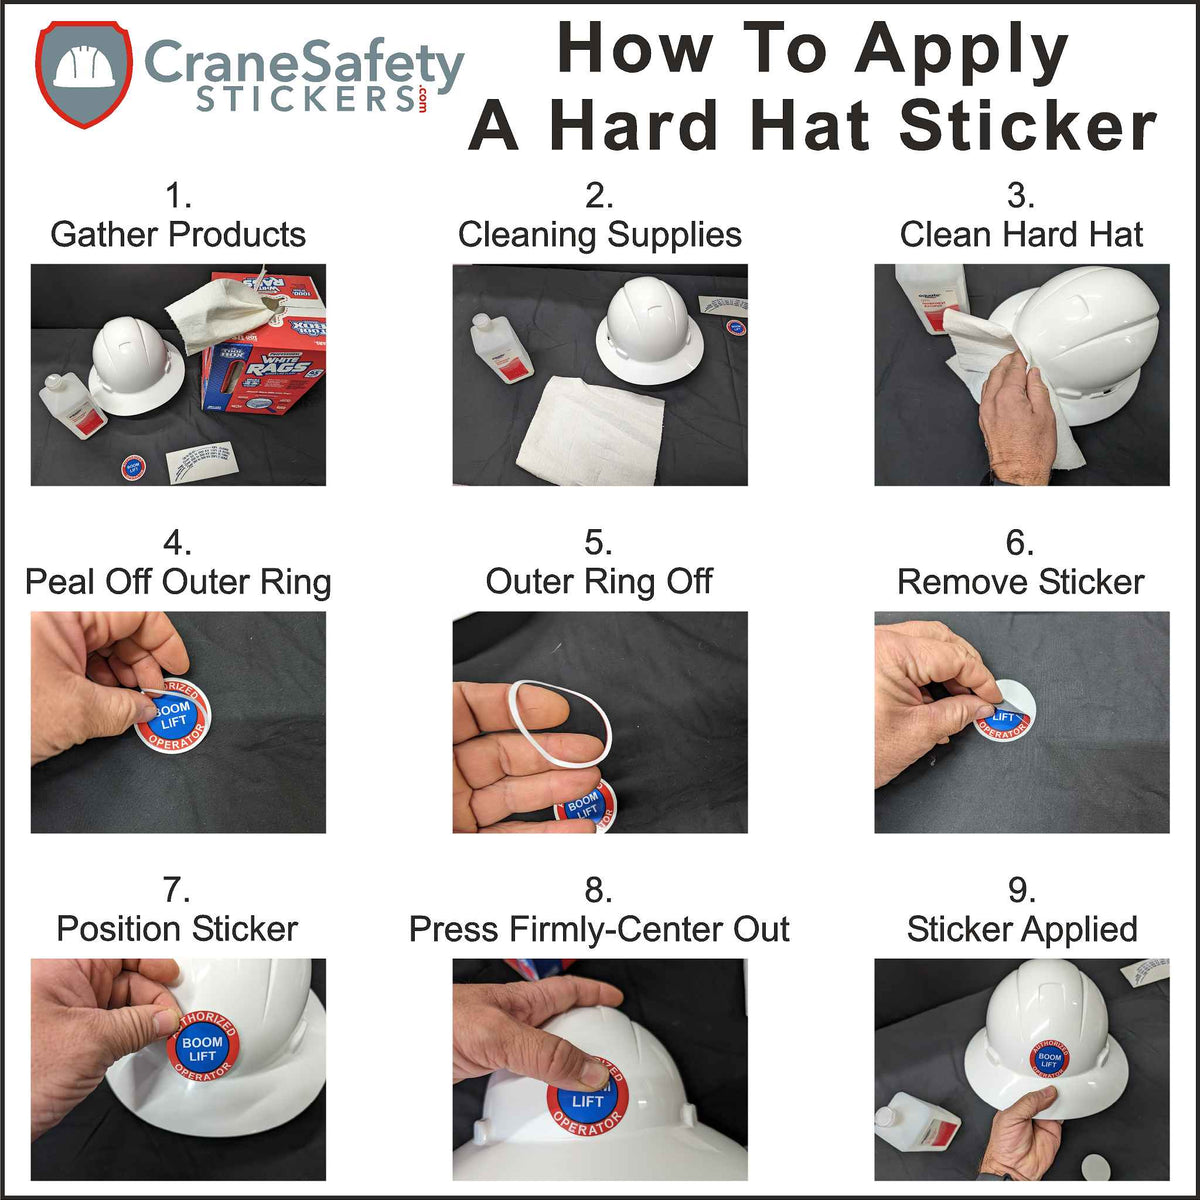 How To Apply An AED Certified Sticker to a hard hat.